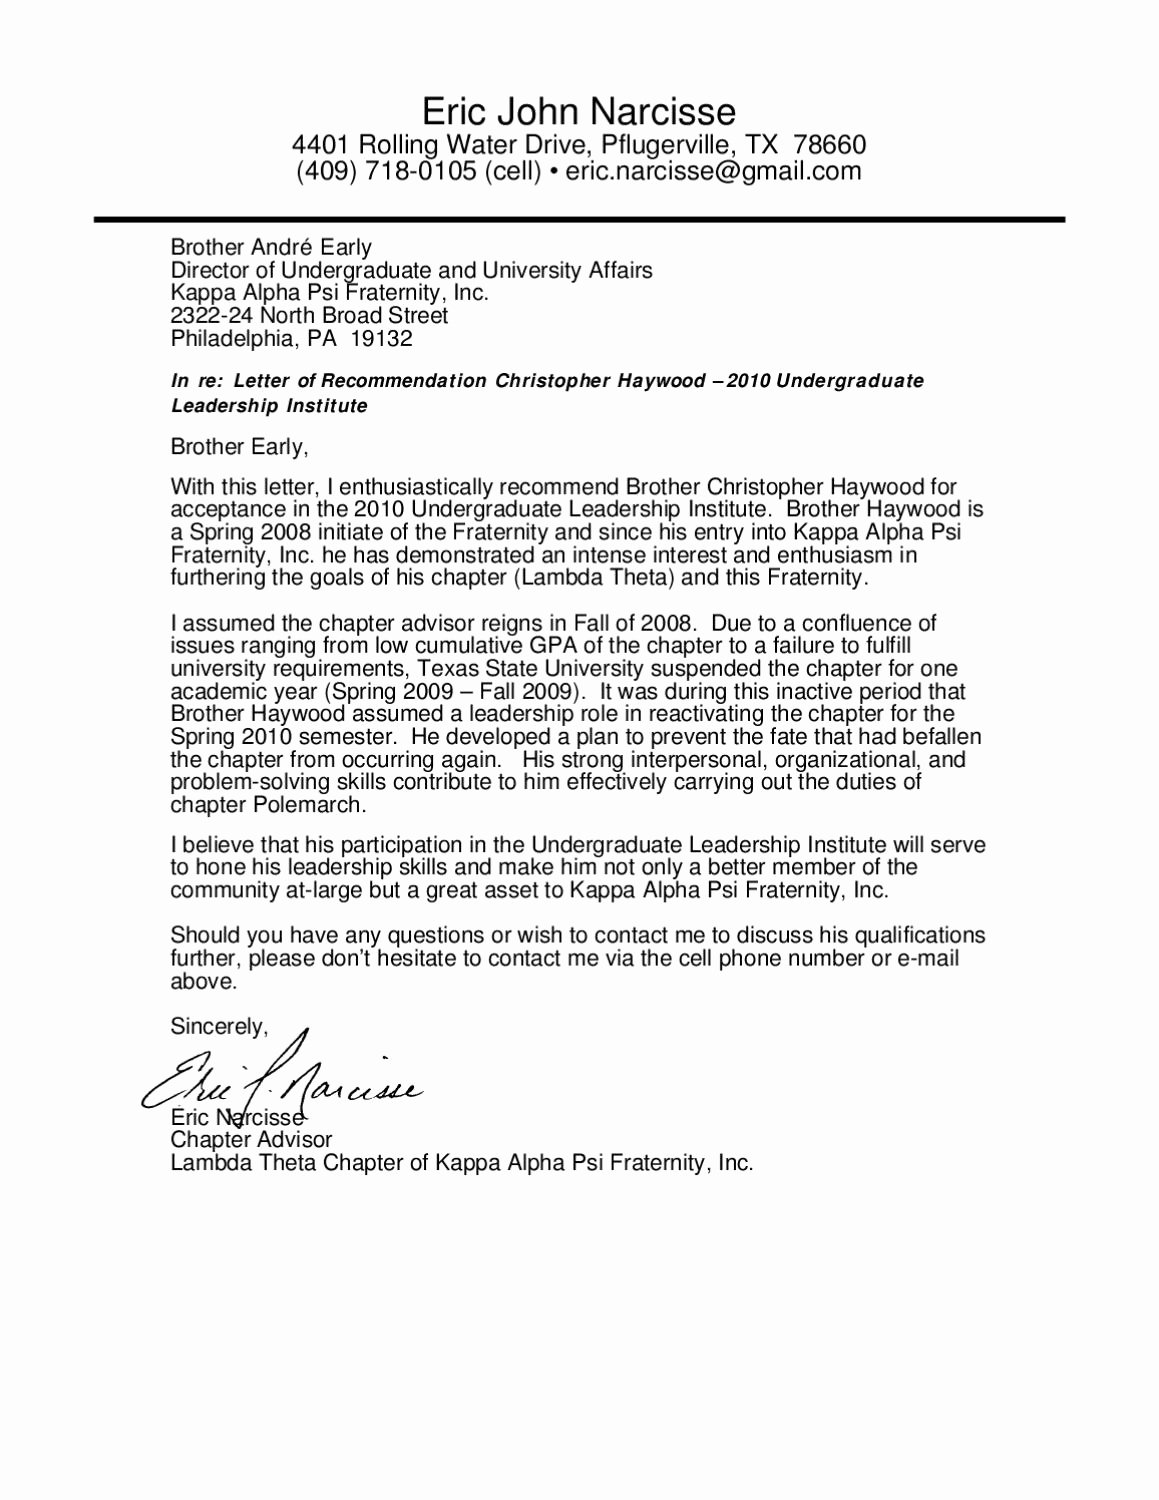 Sorority Recommendation Letter Example New Letter Of Rec by Chris Haywood issuu